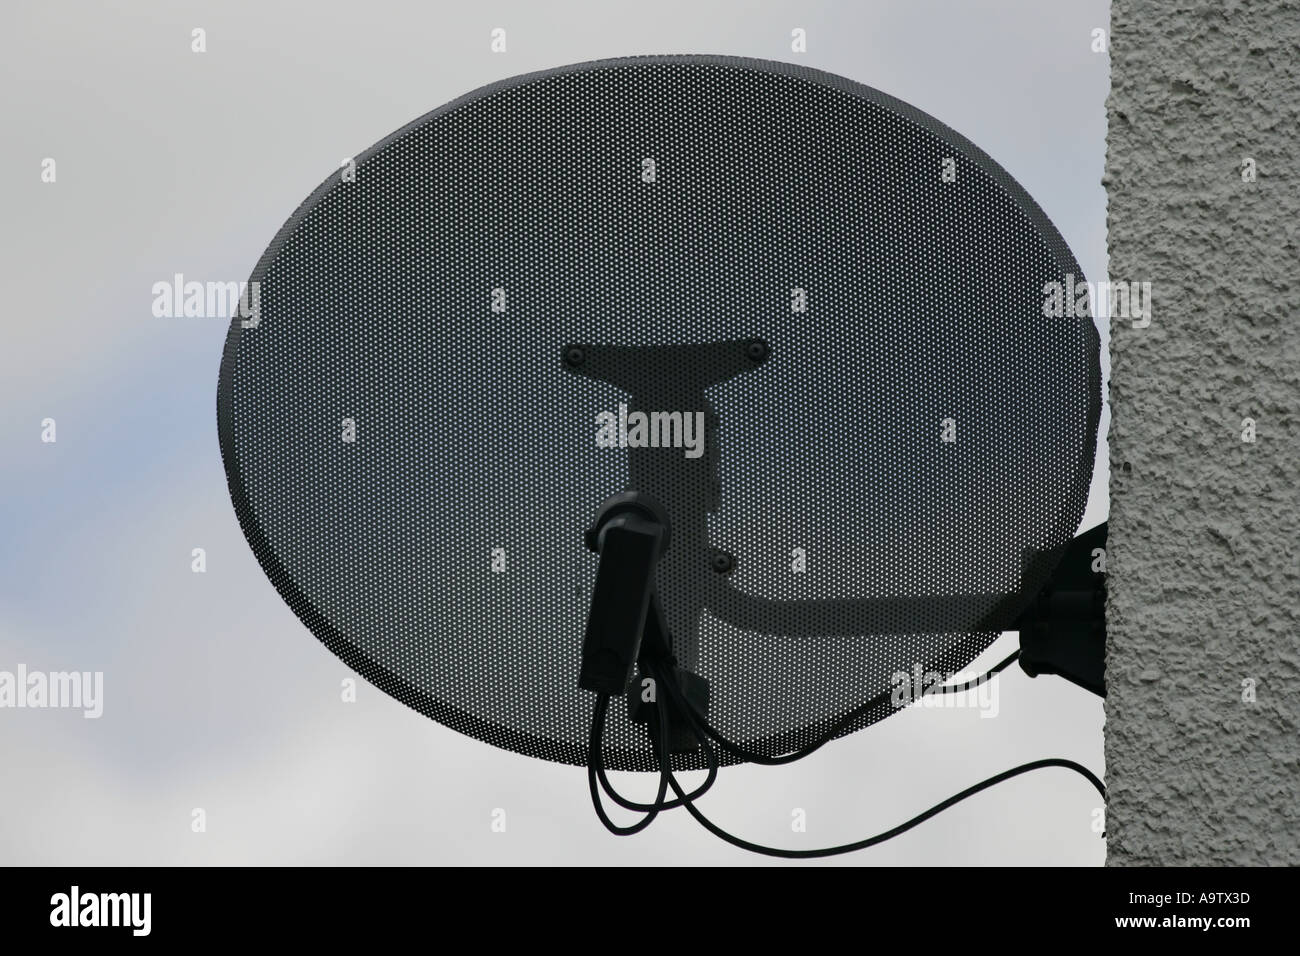 Satellite dish attached to side of house Stock Photo